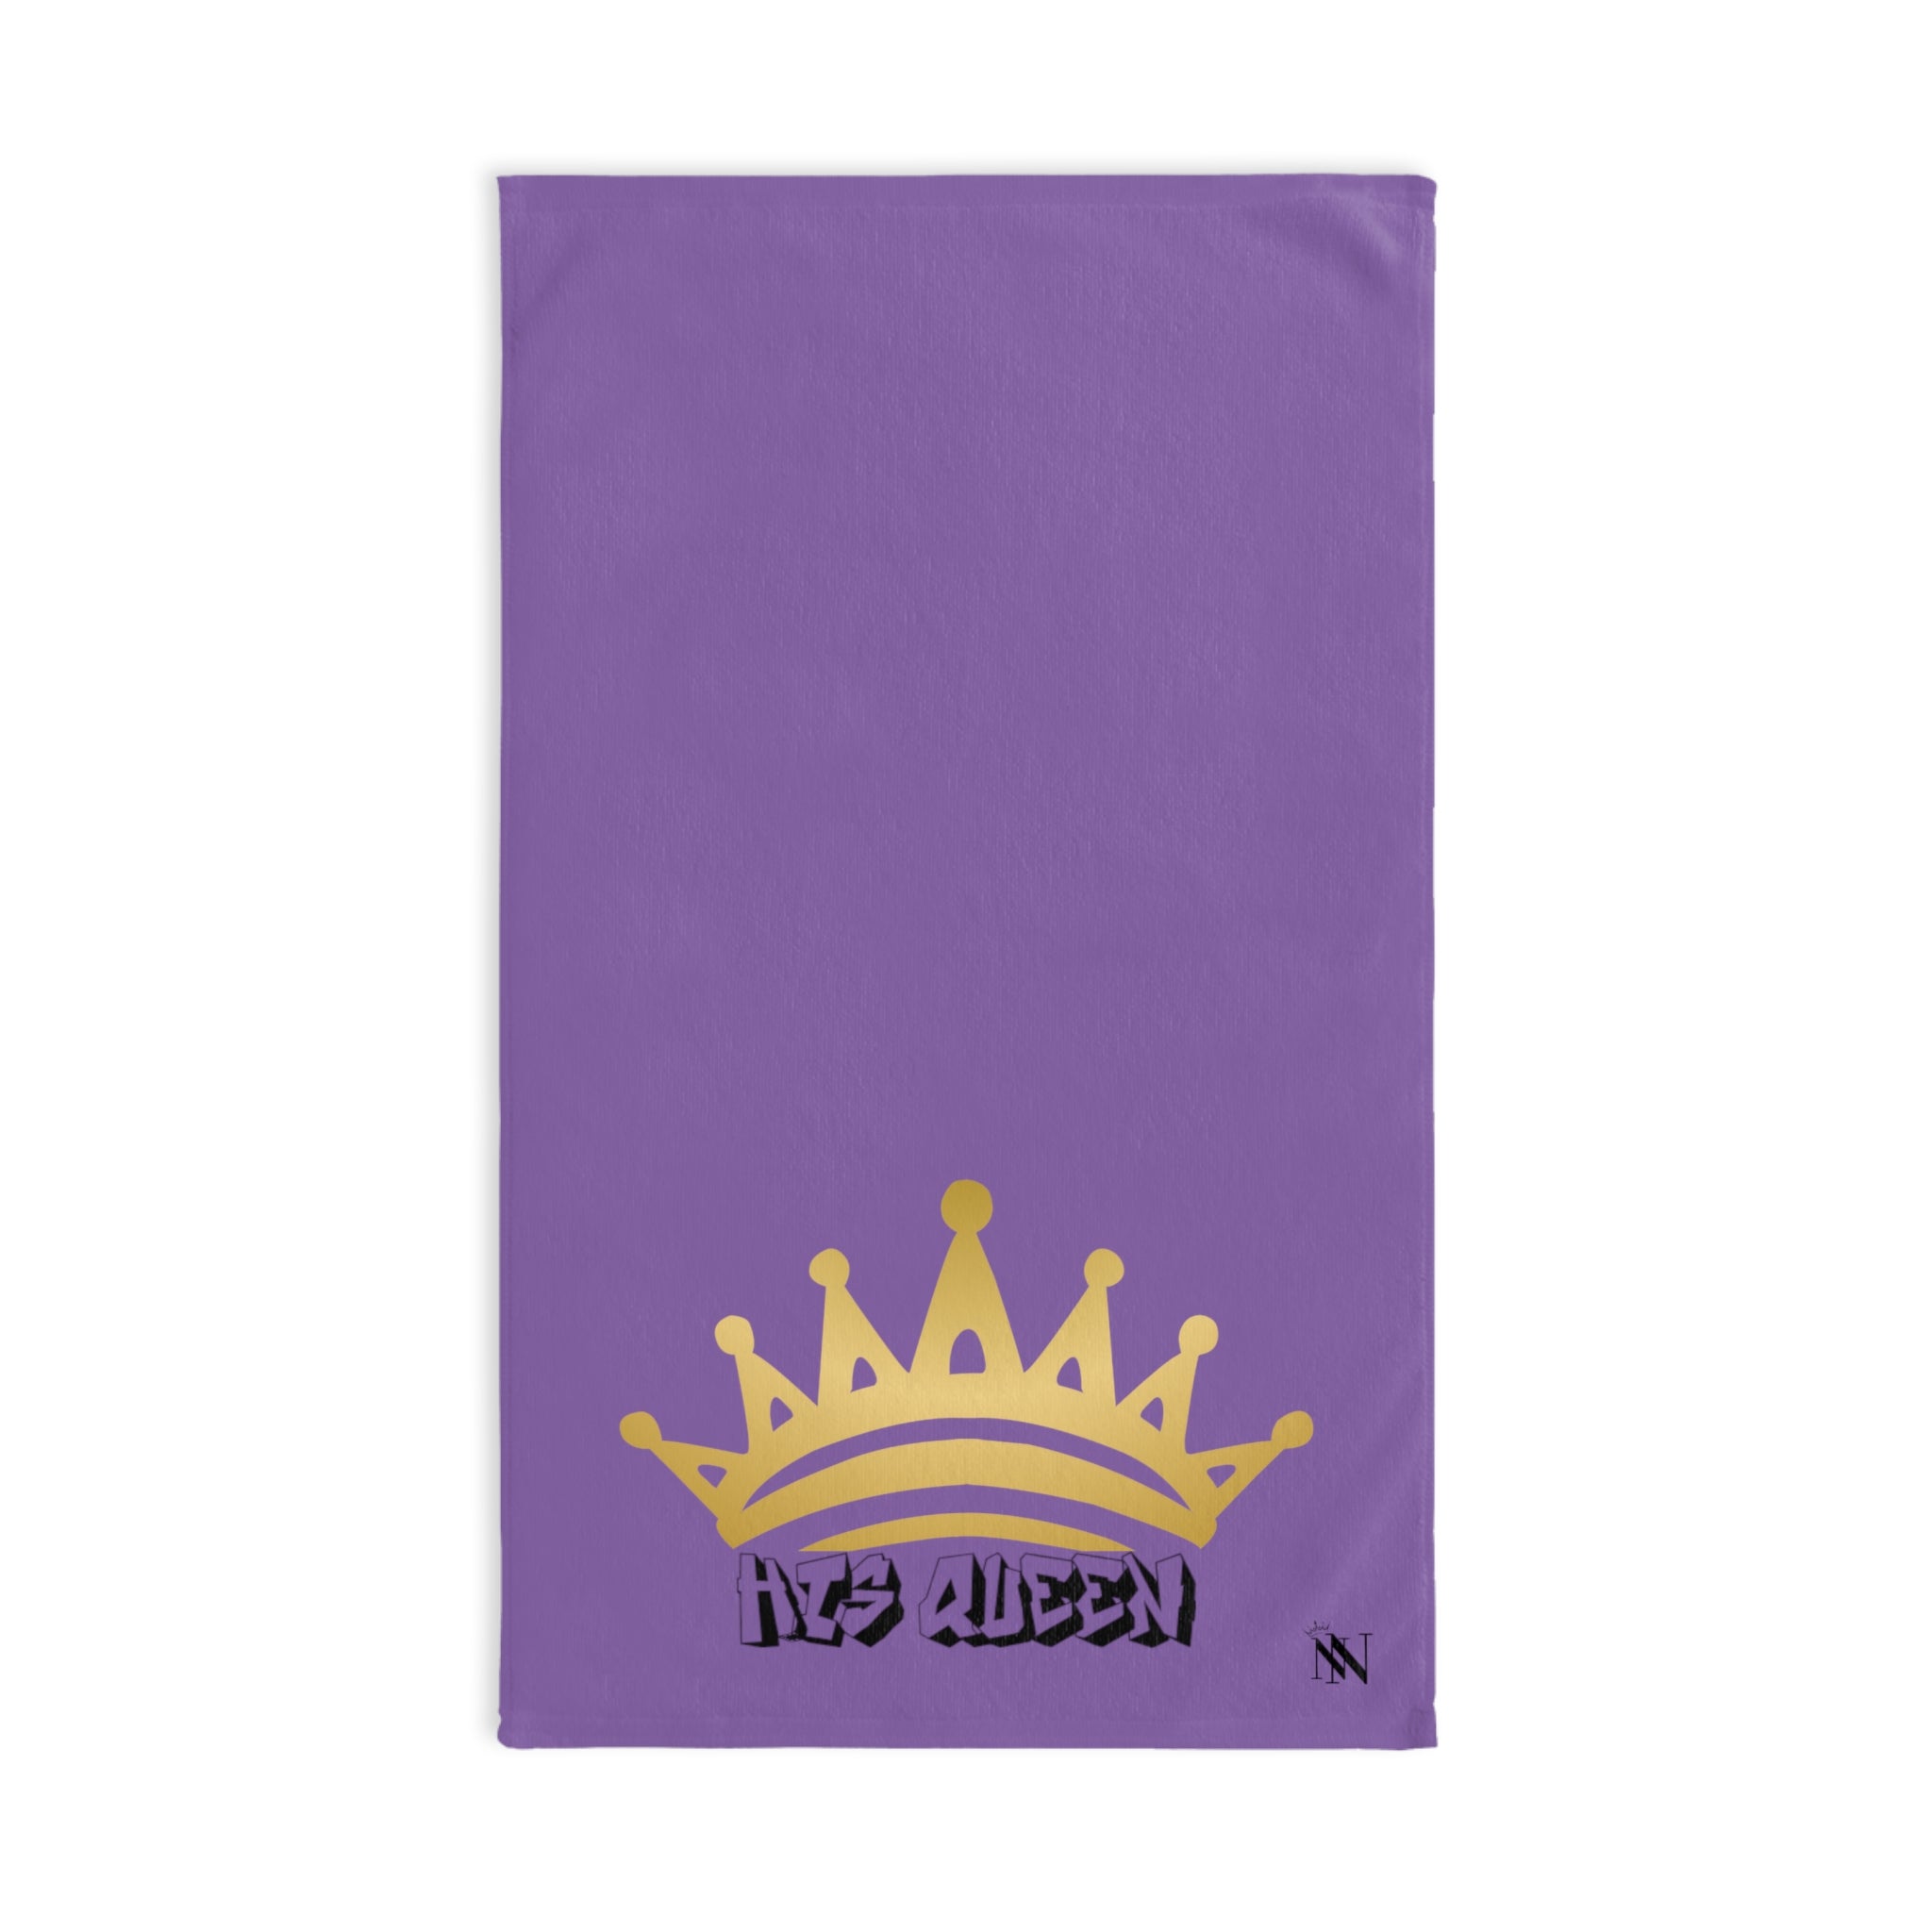 Gold Crown Queen Lavendar | Funny Gifts for Men - Gifts for Him - Birthday Gifts for Men, Him, Husband, Boyfriend, New Couple Gifts, Fathers & Valentines Day Gifts, Hand Towels NECTAR NAPKINS